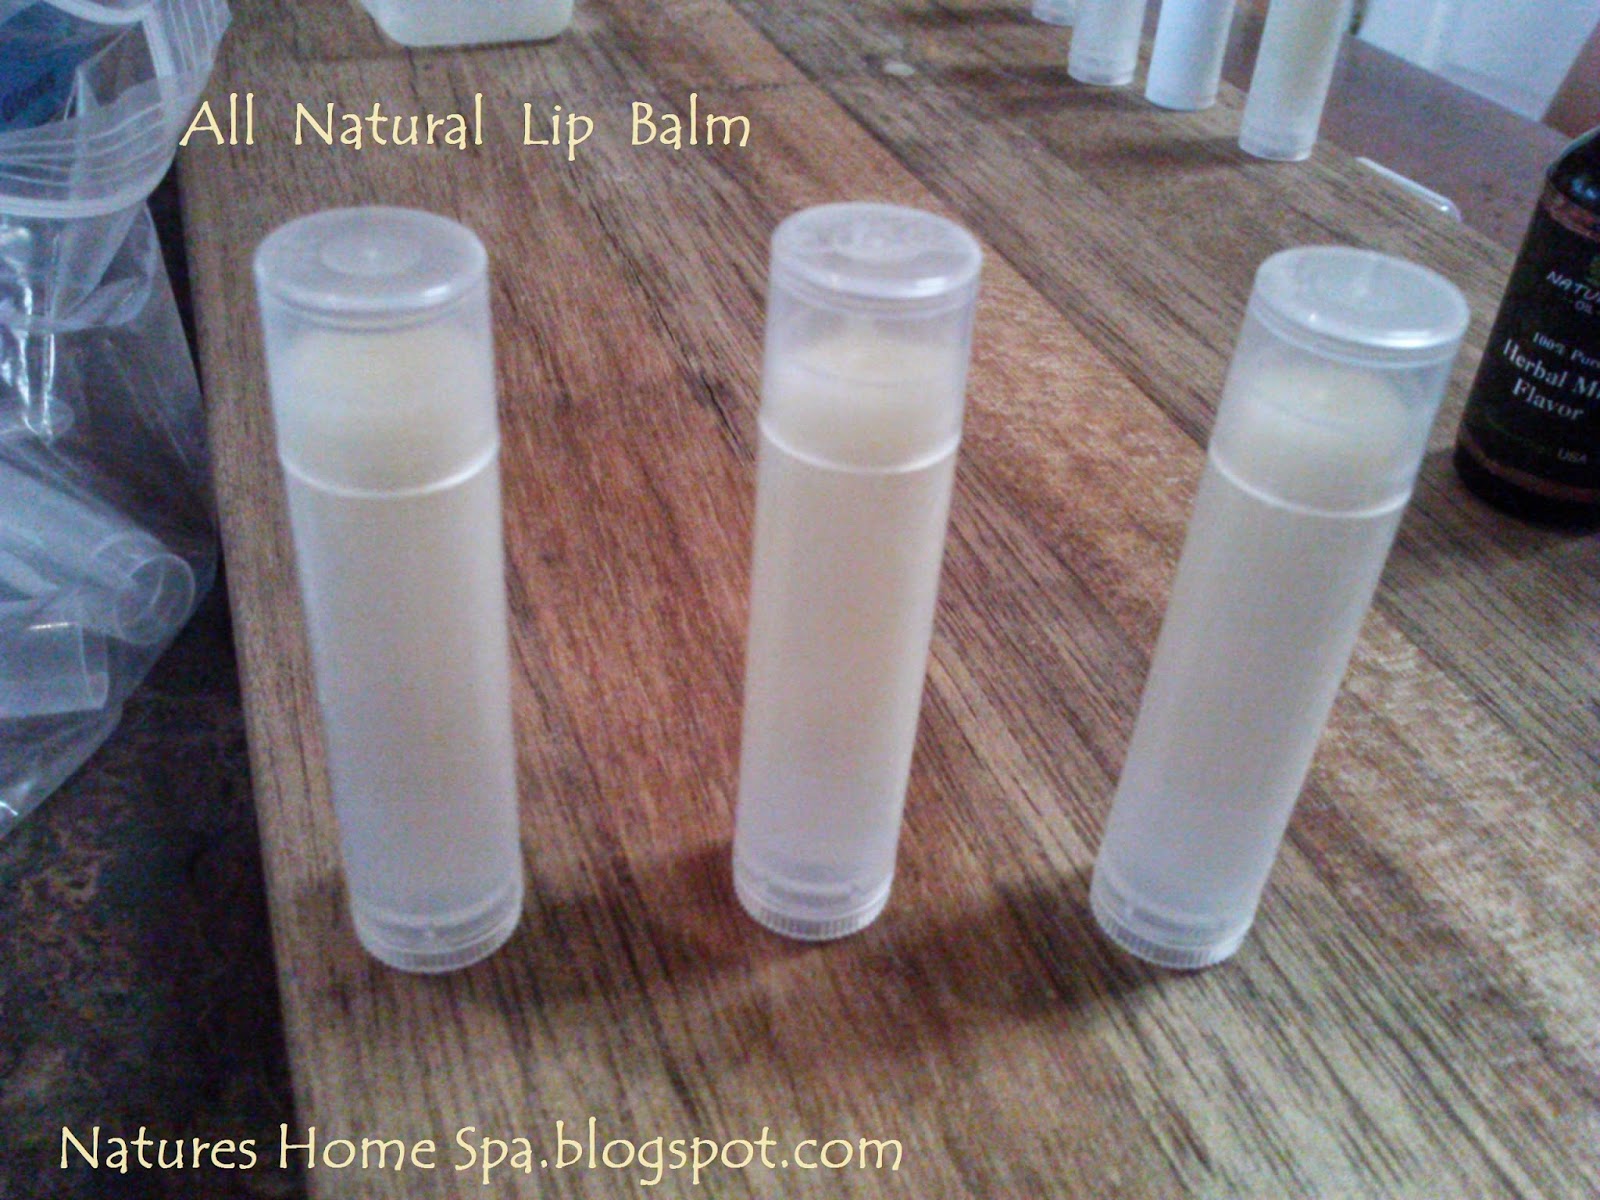 Natures Home Spa: How to make Lip Balm, recipe with easy to find ingredients